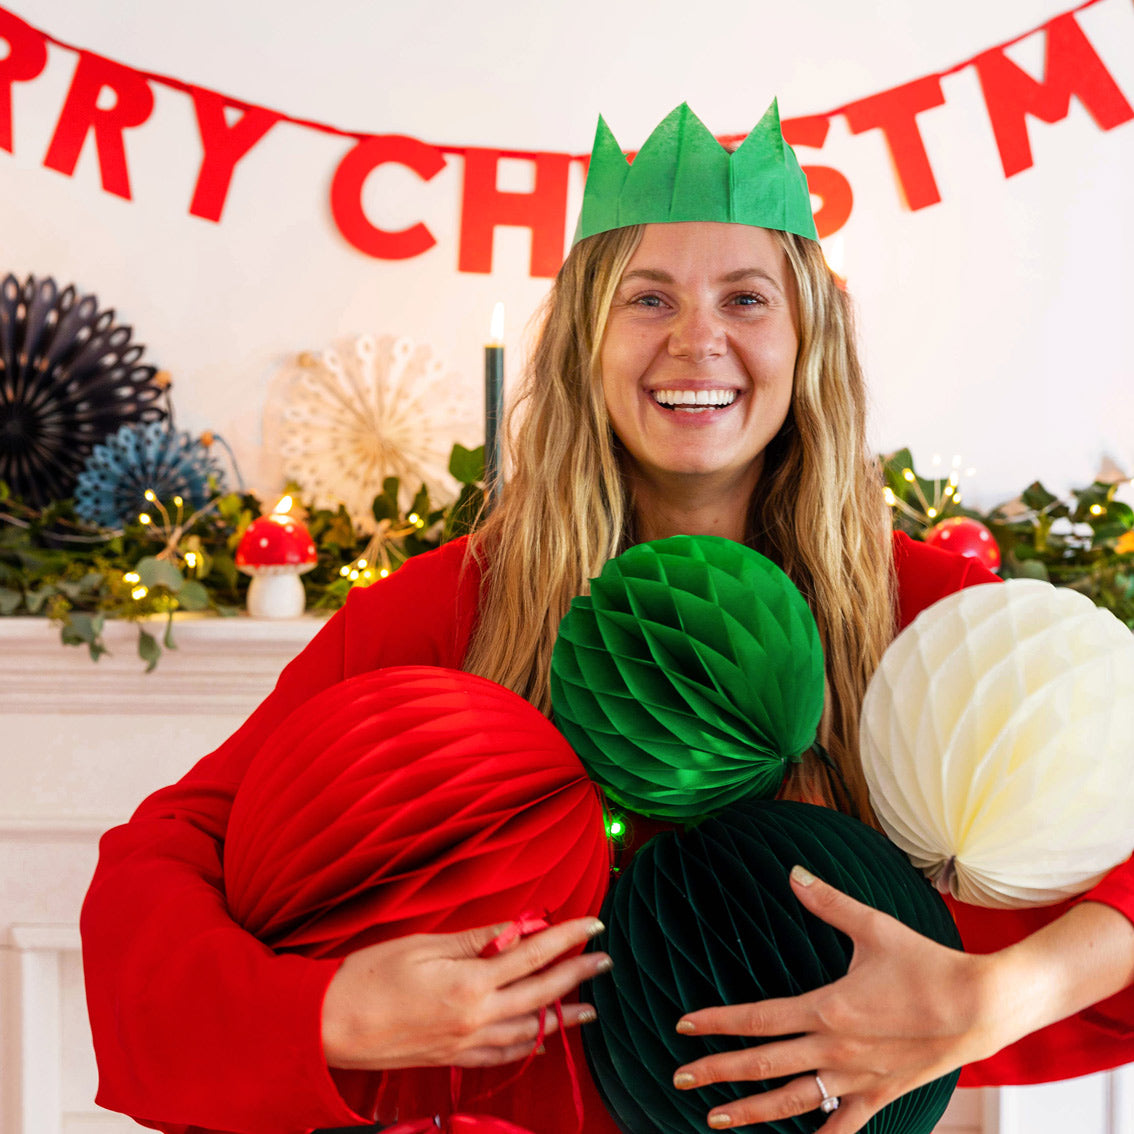 An image of a white woman with blonde hair holding 4 christmas paper honeycomb ball decorations in her arms. She has a green cracker party hat on, a red jumper and is standing infront of a festively decorated fireplace.